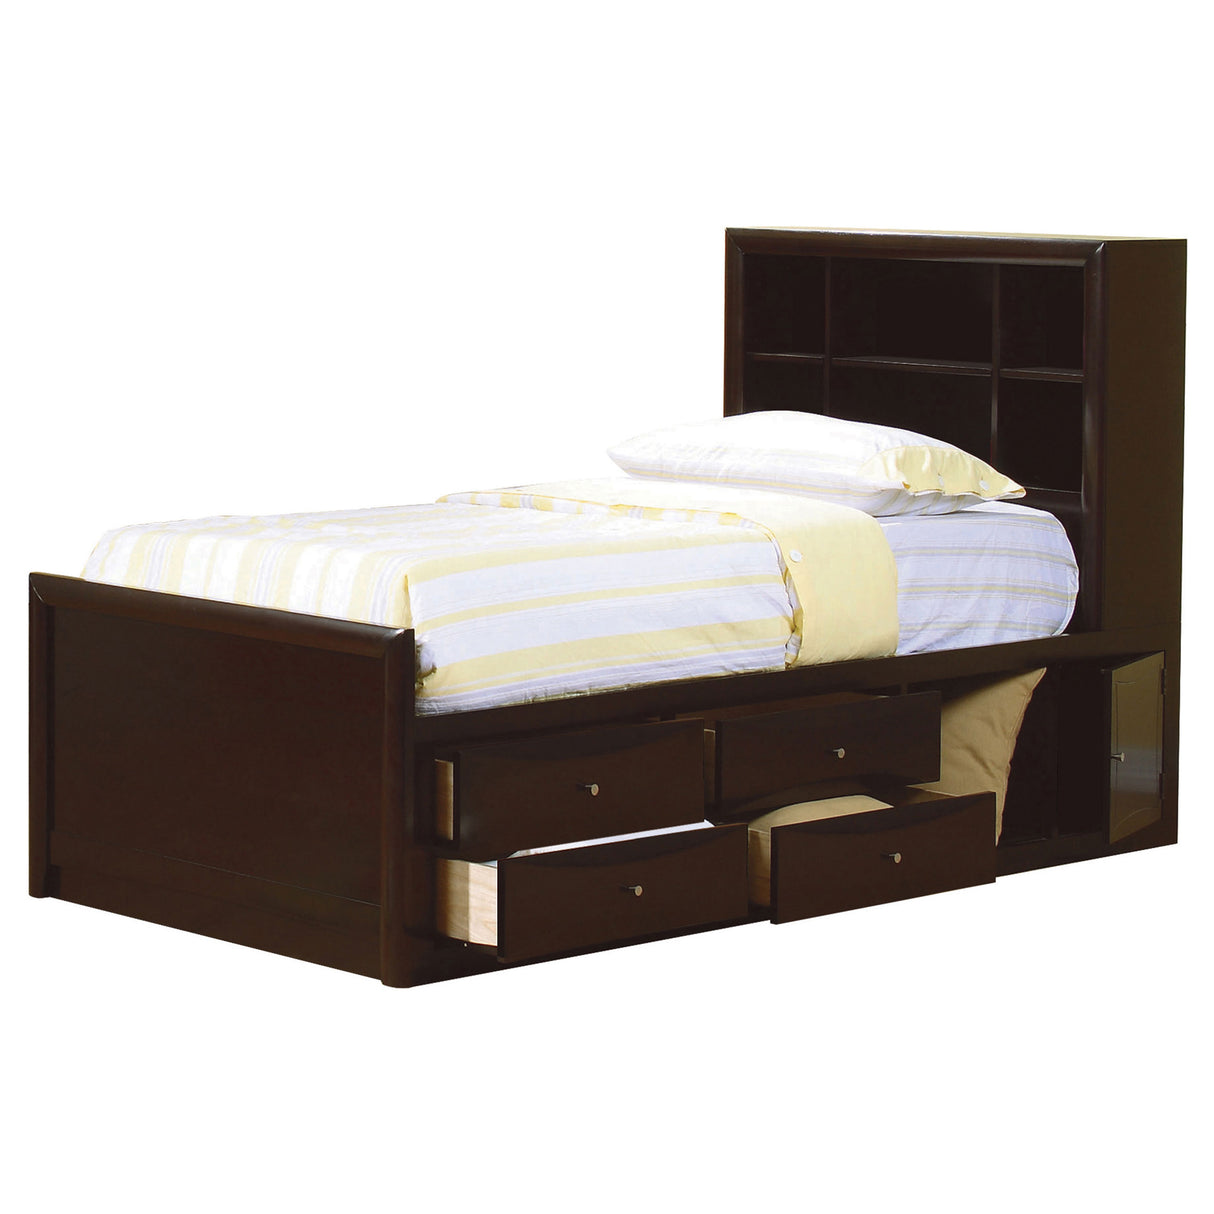 Full Storage Bed - Phoenix Wood Full Storage Bookcase Bed Cappuccino